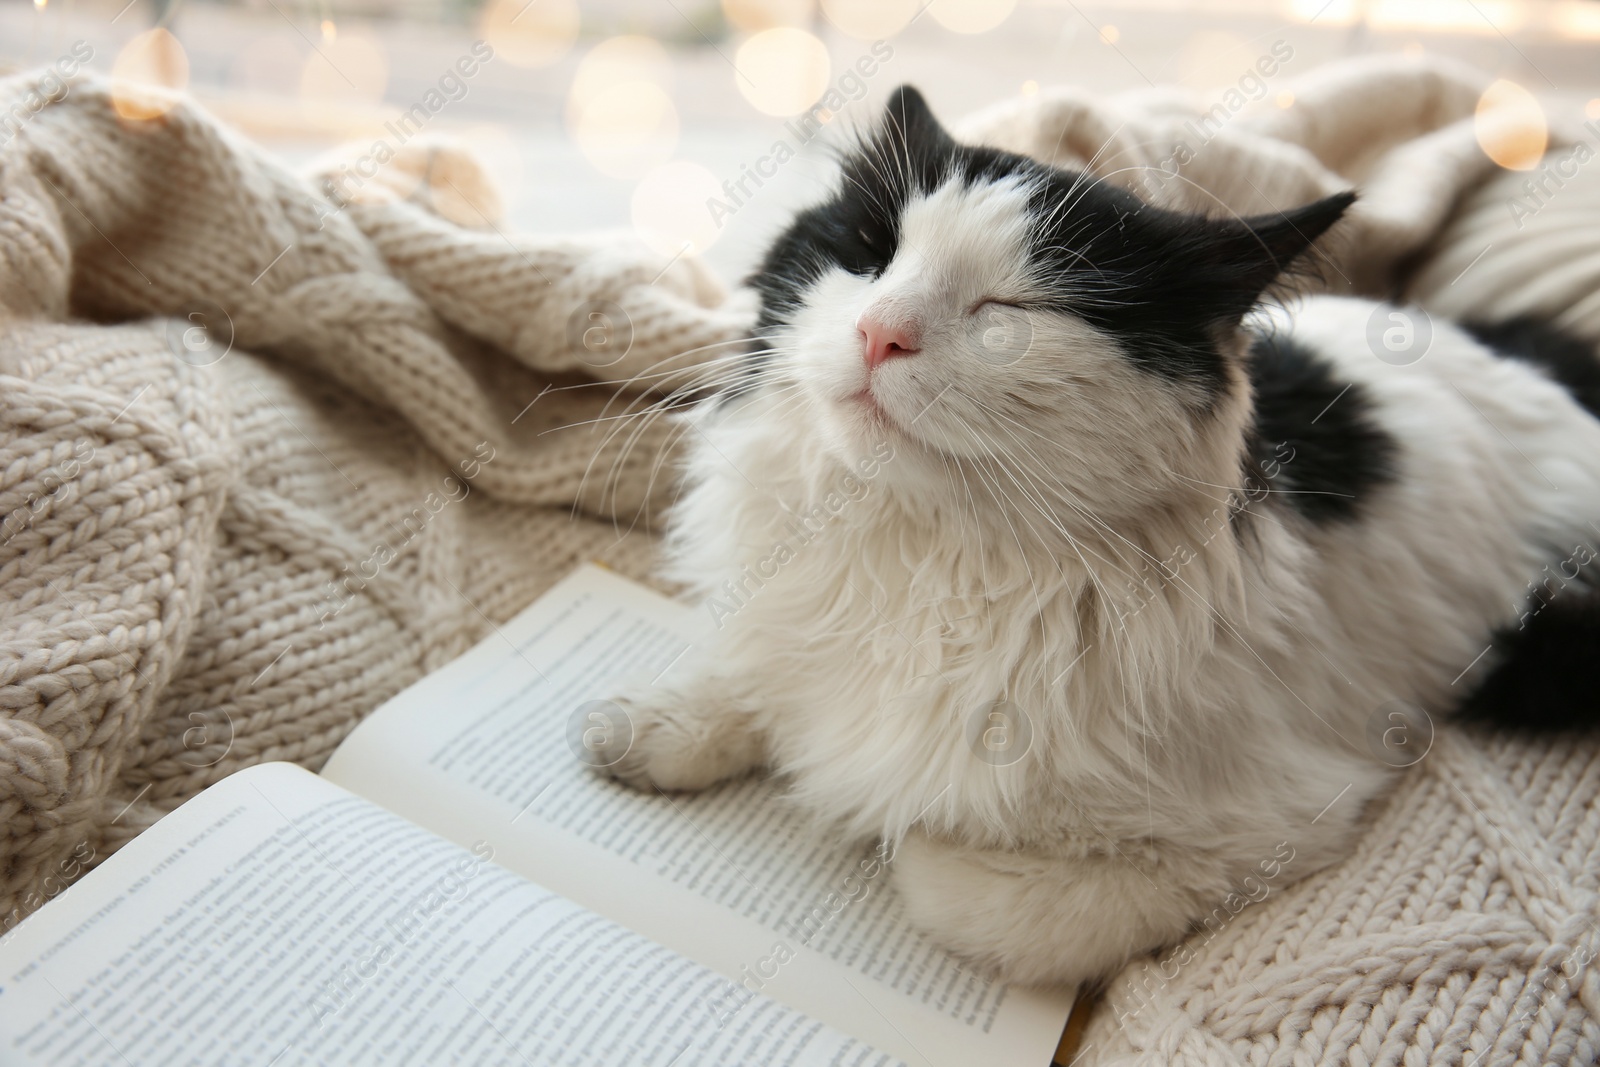 Photo of Adorable cat lying near open book on knitted blanket